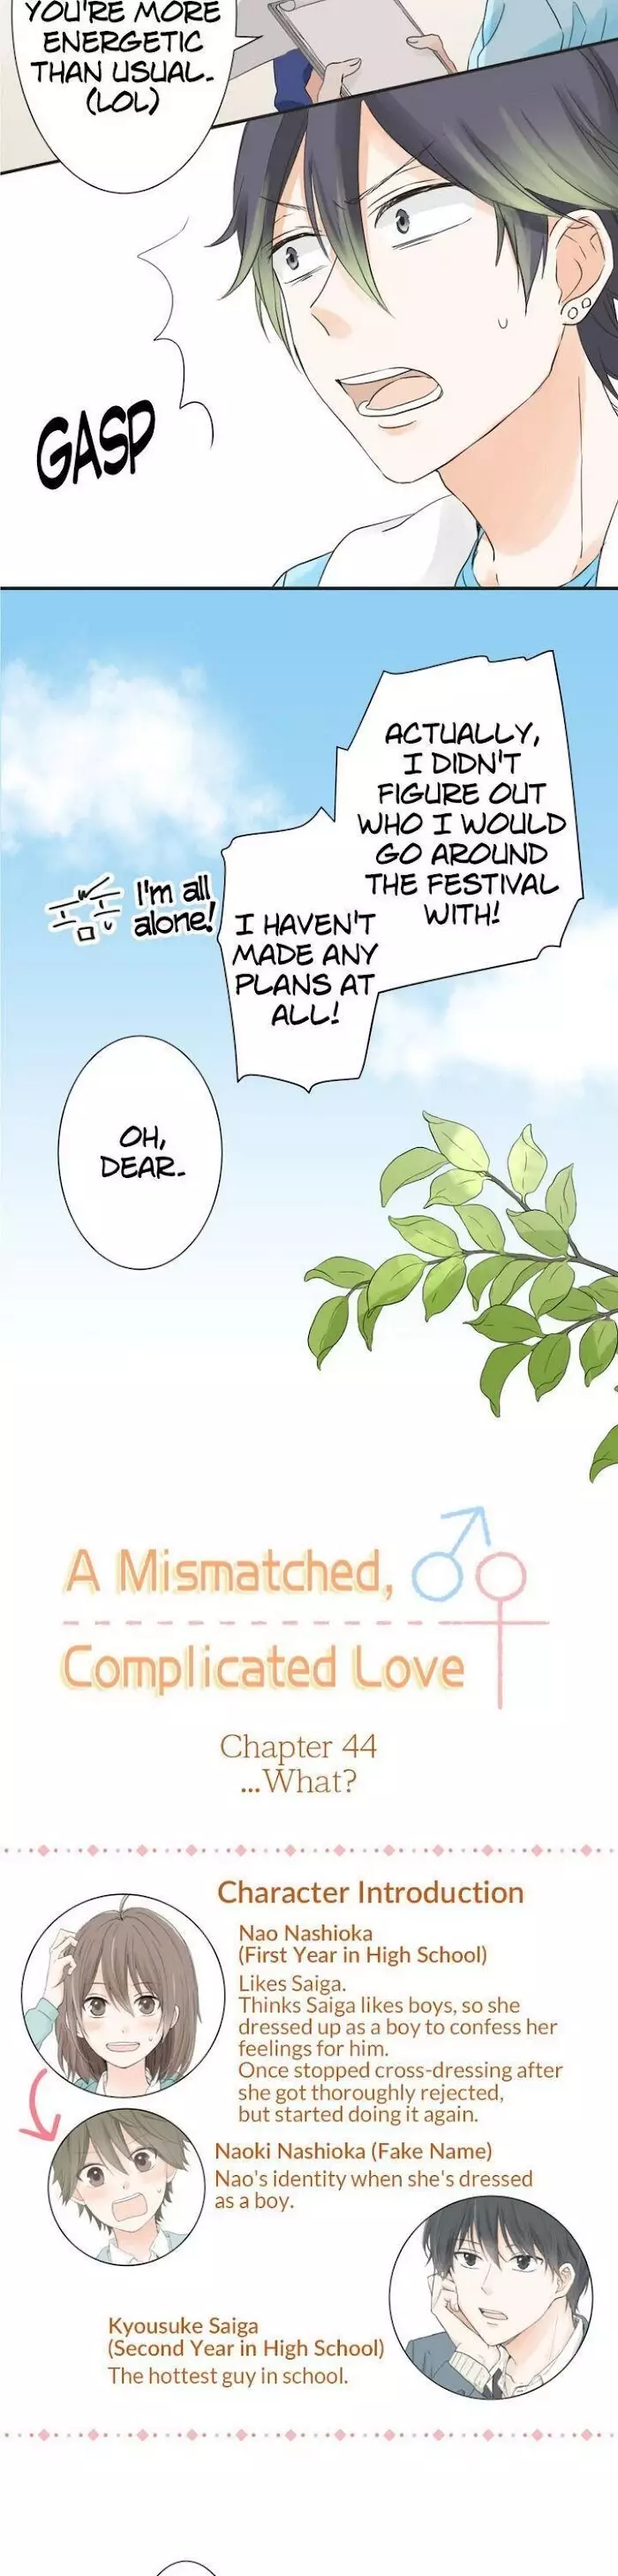 Mismatched Love - 44 page 3-409fd330